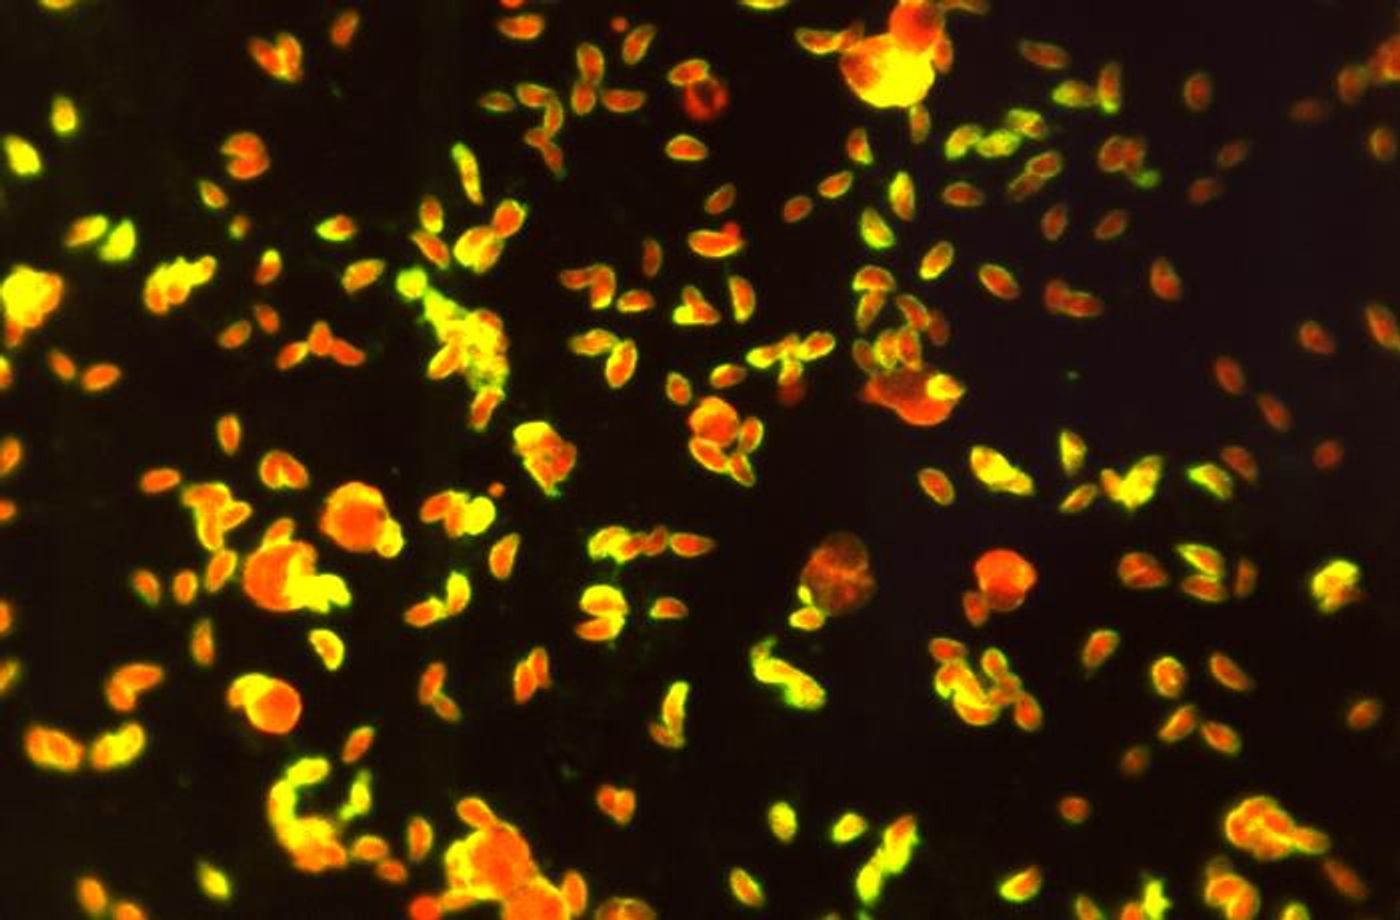 A photomicrograph of a fluorescent antibody stained sample at 570X reveals numerous Toxoplasma sp. tachyzoites, interpreted as a positive reaction for antibodies to T. gondii. The yellow fluorescence extends around the periphery of each organism. / Credit: CDC